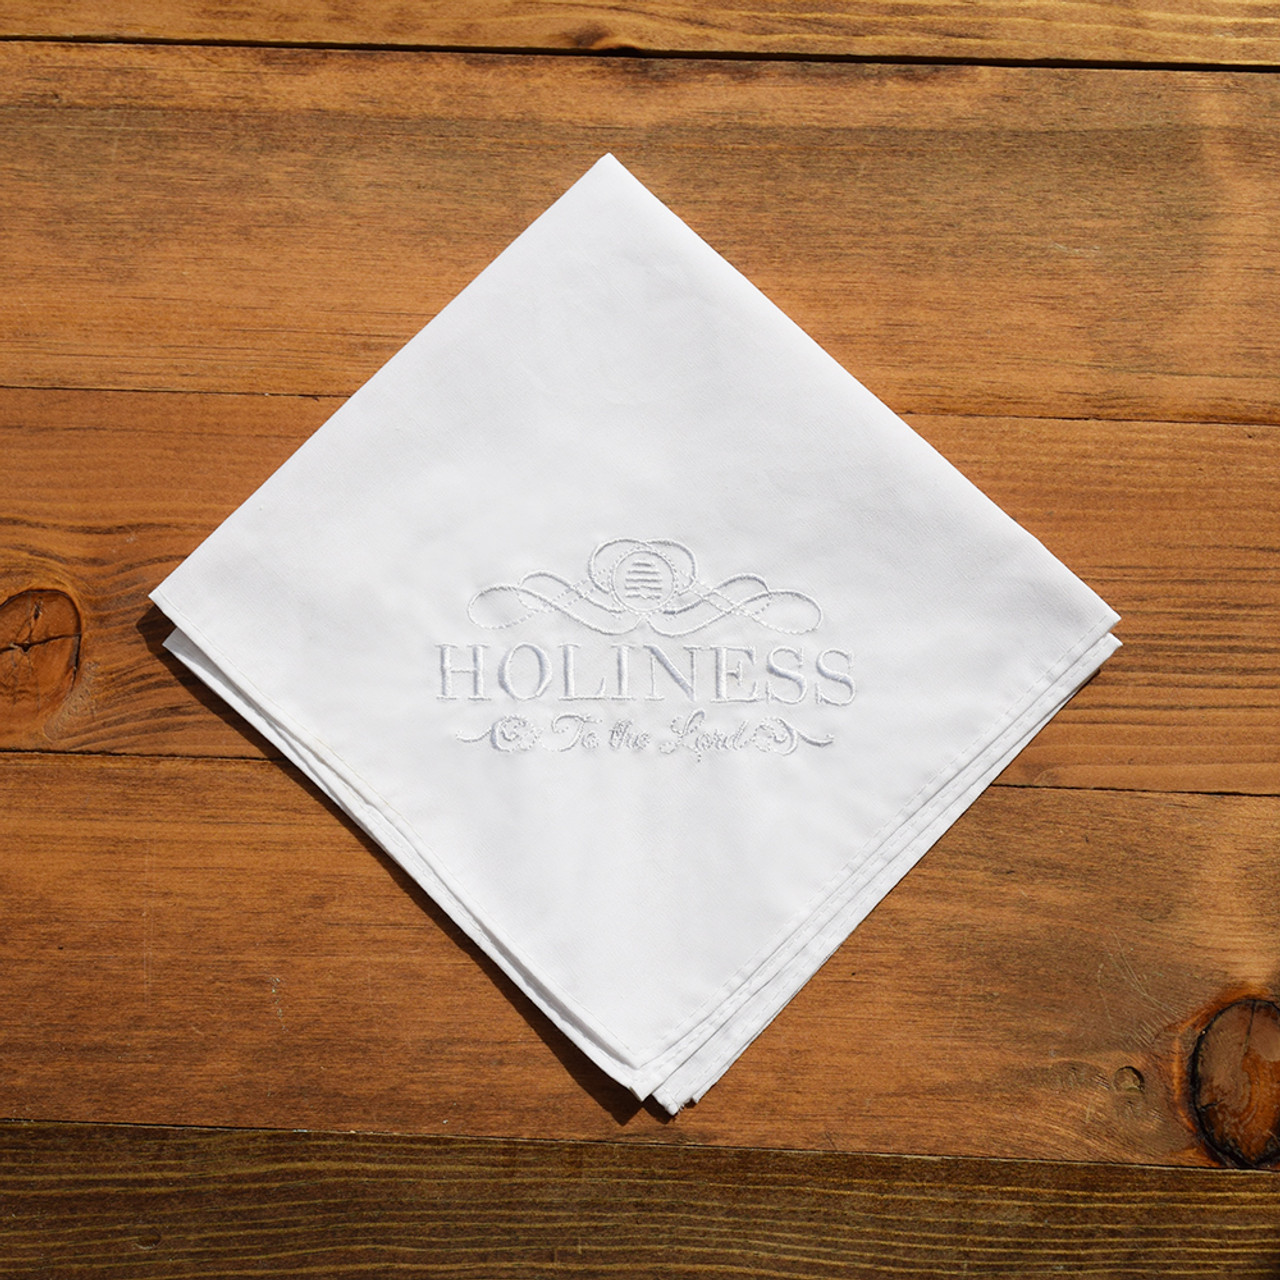 Holiness to the Lord (White Handkerchief)